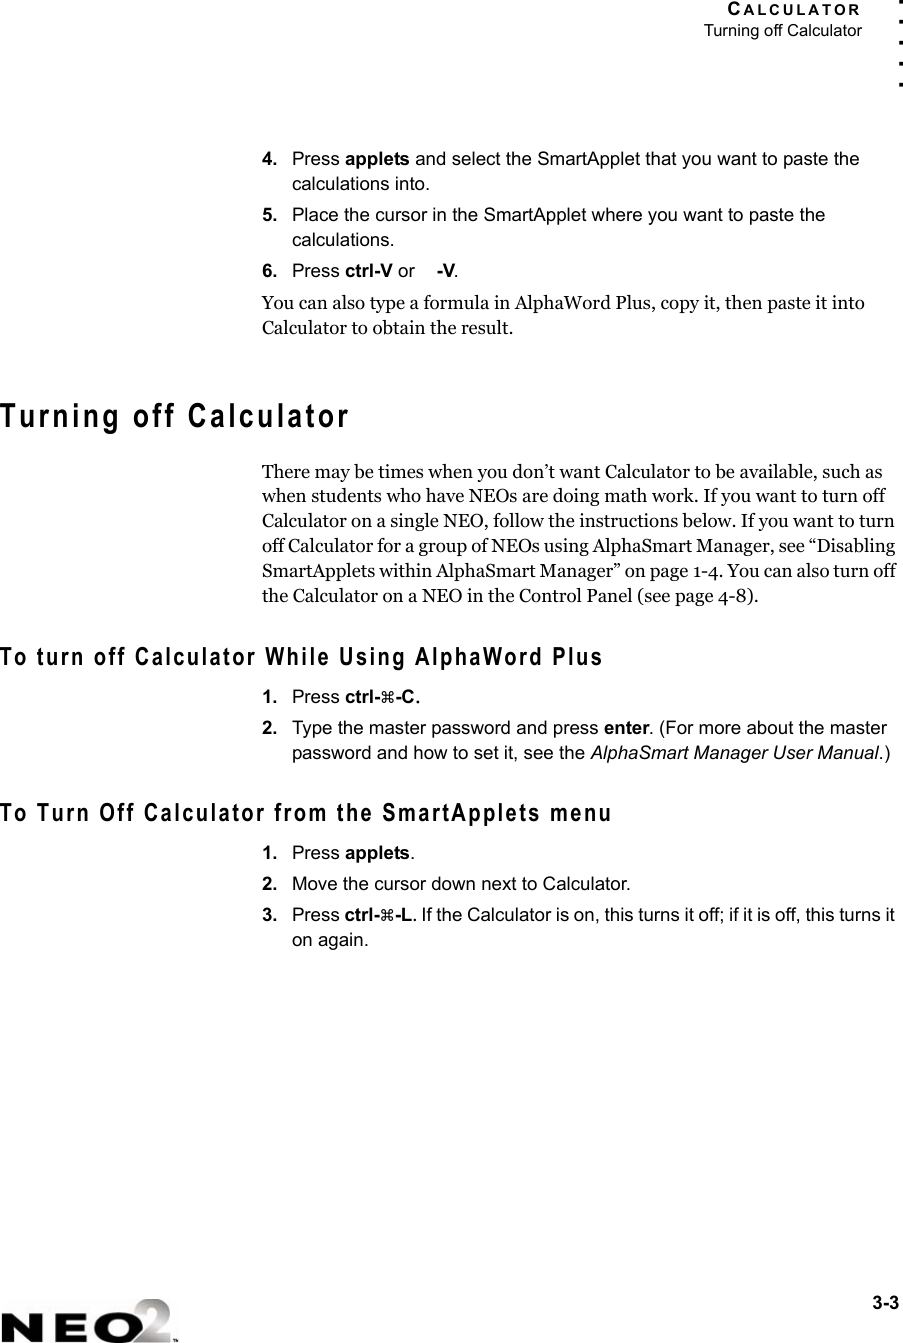 CALCULATORTurning off Calculator3-3. . . . .4. Press applets and select the SmartApplet that you want to paste the calculations into.5. Place the cursor in the SmartApplet where you want to paste the calculations.6. Press ctrl-V or  -V.You can also type a formula in AlphaWord Plus, copy it, then paste it into Calculator to obtain the result.Turning off CalculatorThere may be times when you don’t want Calculator to be available, such as when students who have NEOs are doing math work. If you want to turn off Calculator on a single NEO, follow the instructions below. If you want to turn off Calculator for a group of NEOs using AlphaSmart Manager, see “Disabling SmartApplets within AlphaSmart Manager” on page 1-4. You can also turn off the Calculator on a NEO in the Control Panel (see page 4-8).To turn off Calculator While Using AlphaWord Plus1. Press ctrl-a-C.2. Type the master password and press enter. (For more about the master password and how to set it, see the AlphaSmart Manager User Manual.)To Turn Off Calculator from the SmartApplets menu1. Press applets.2. Move the cursor down next to Calculator.3. Press ctrl-a-L. If the Calculator is on, this turns it off; if it is off, this turns it on again.